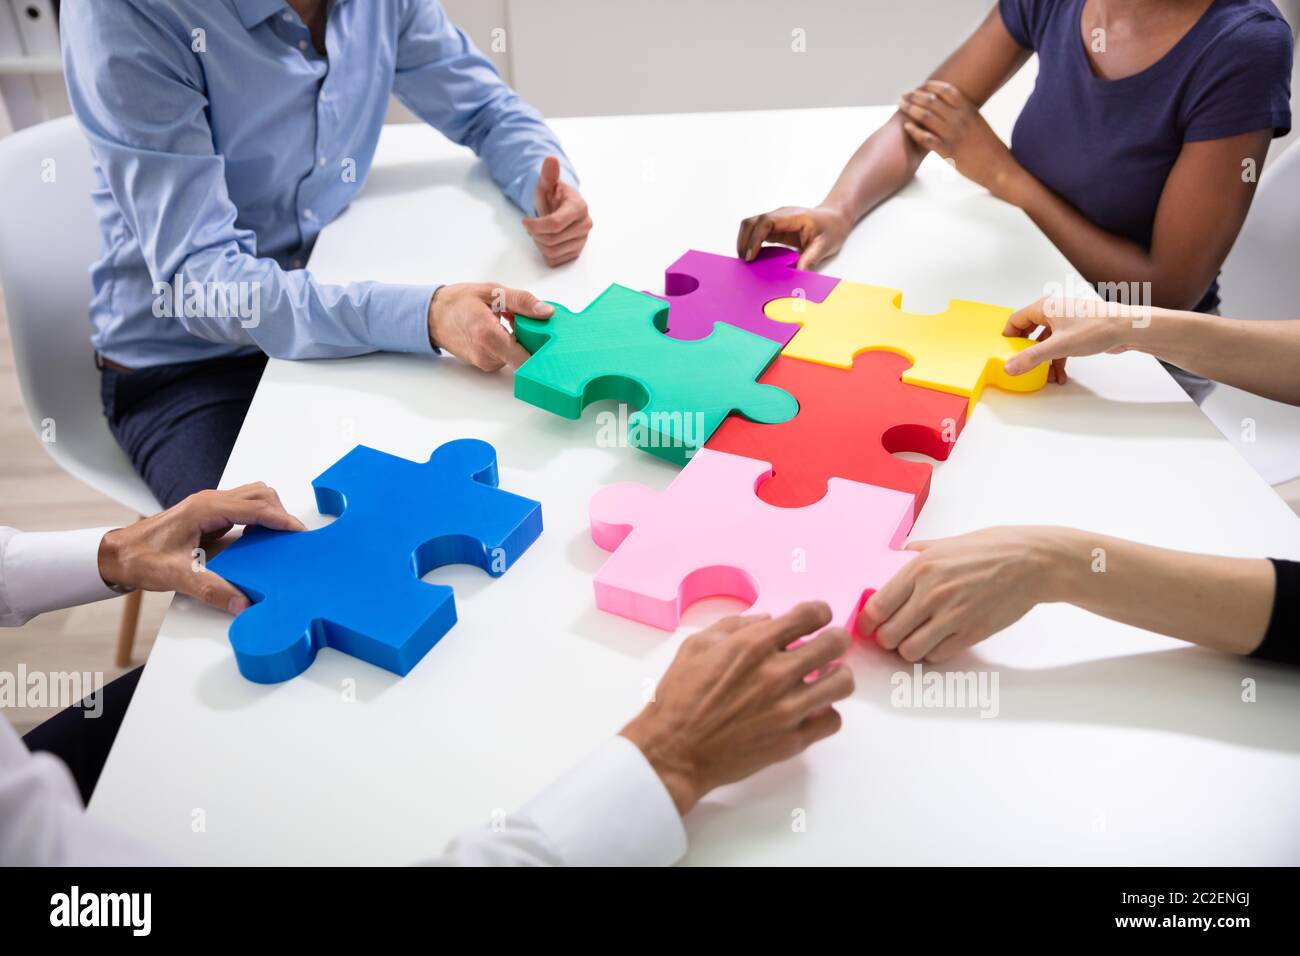 Hands Of Businesspeople Building Colorful Jig Saw Puzzles Together Over White Desk At Workplace Stock Photo